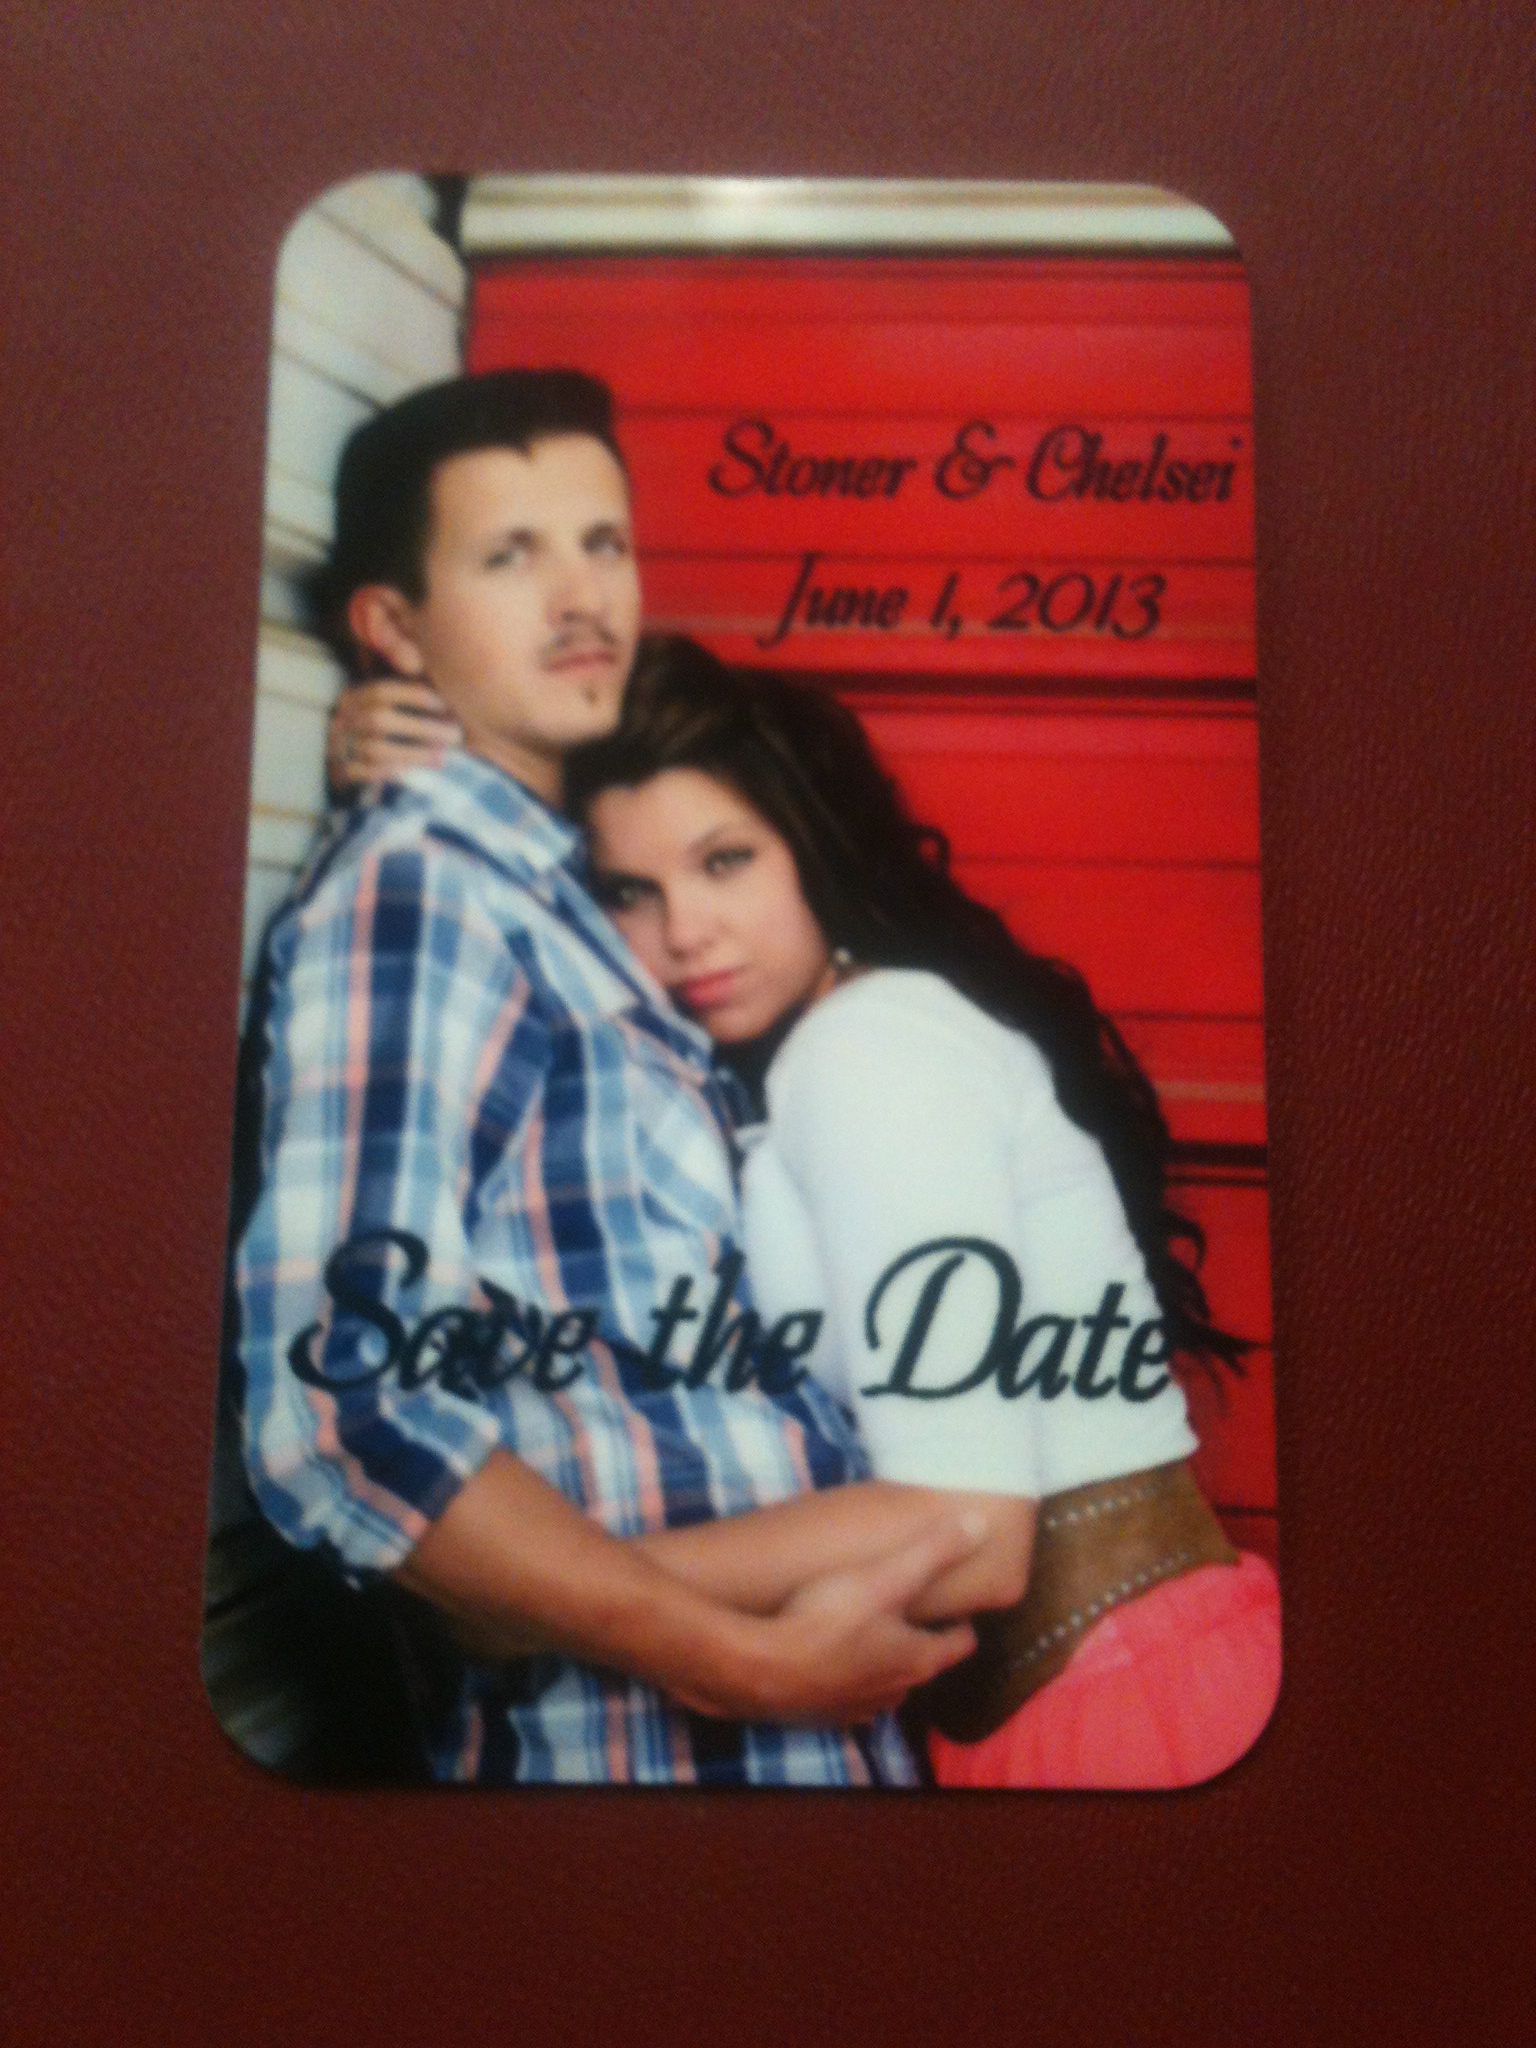 Save the Date made with sublimation printing